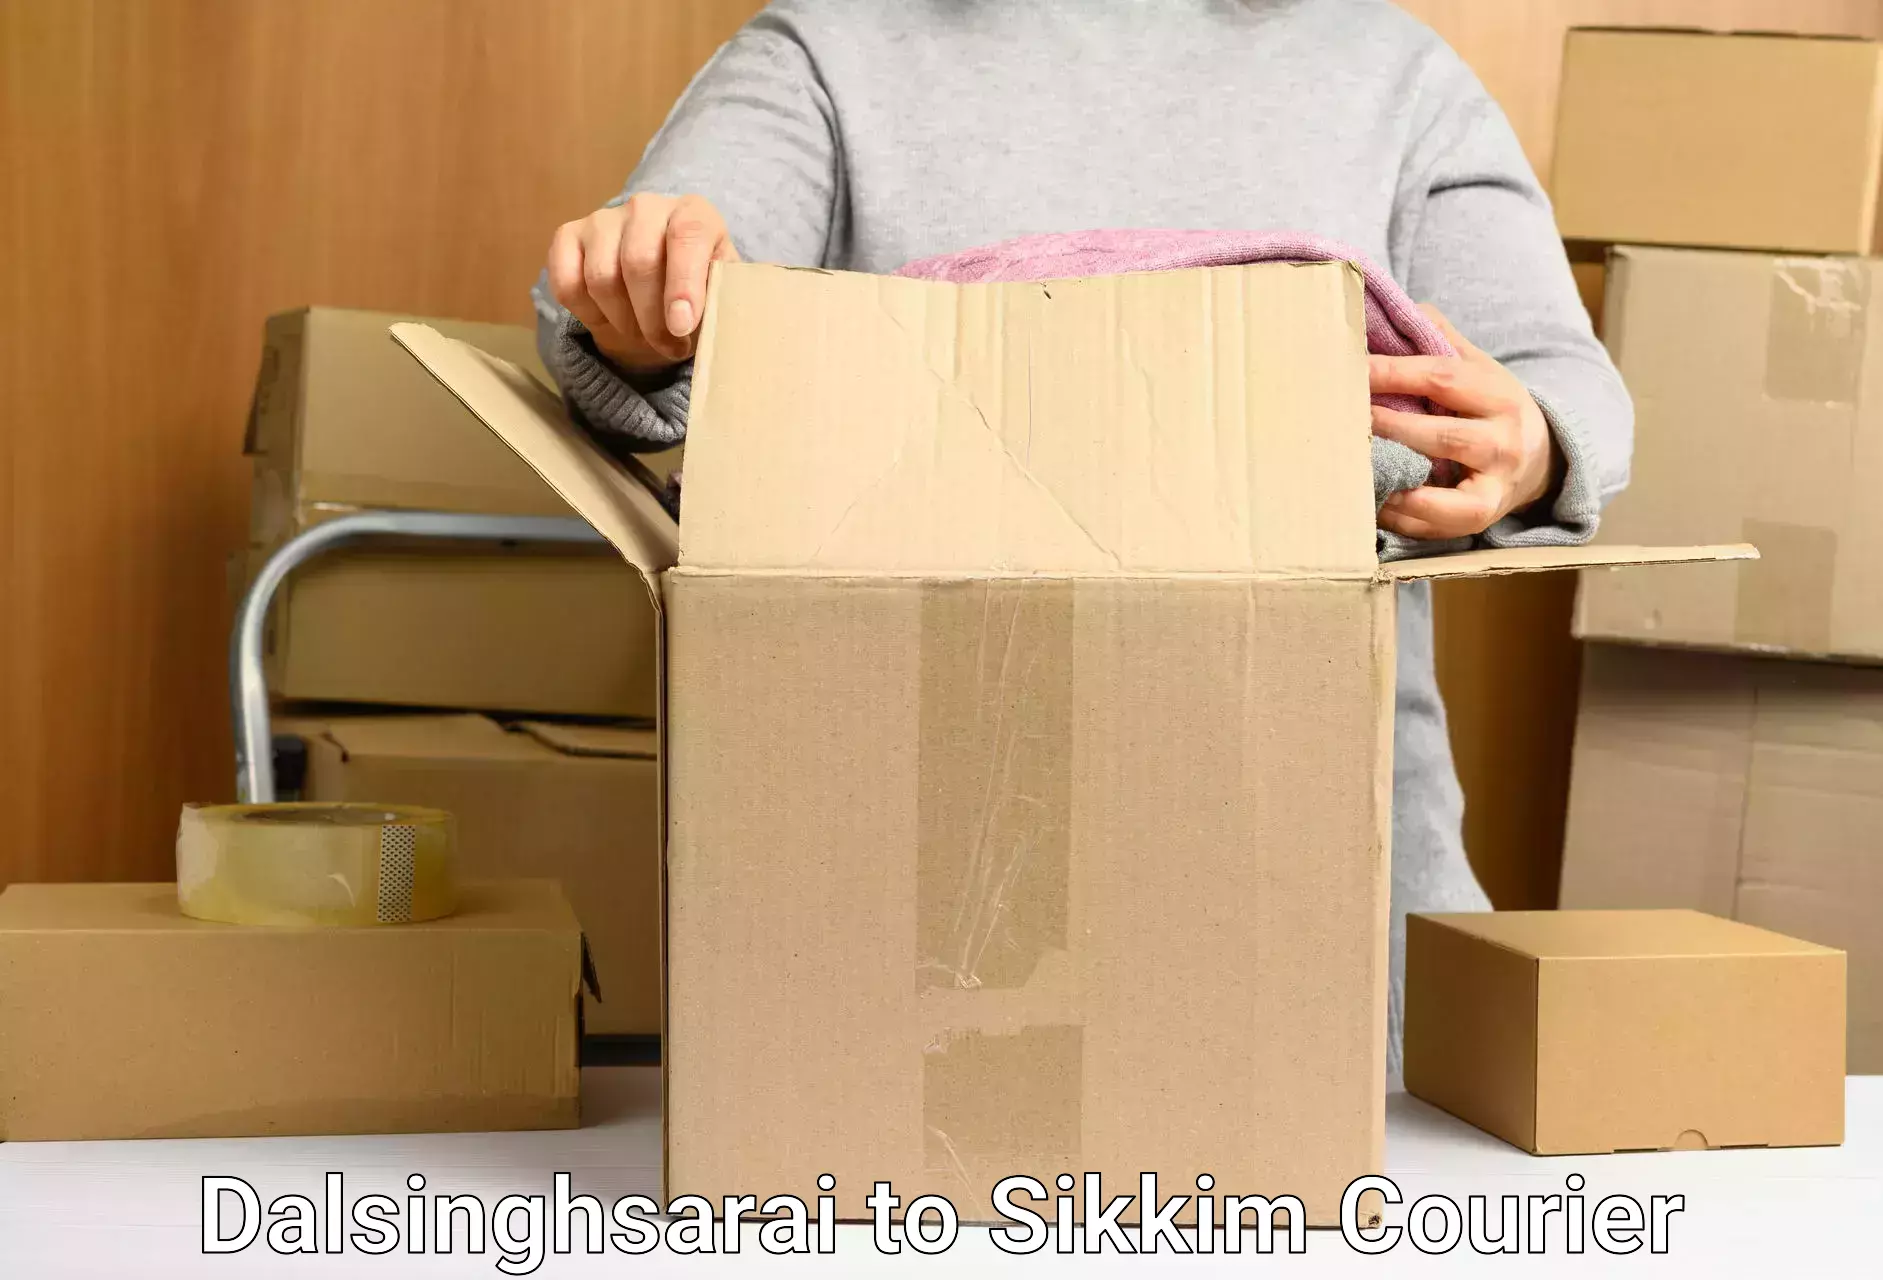 Fast delivery service in Dalsinghsarai to Singtam